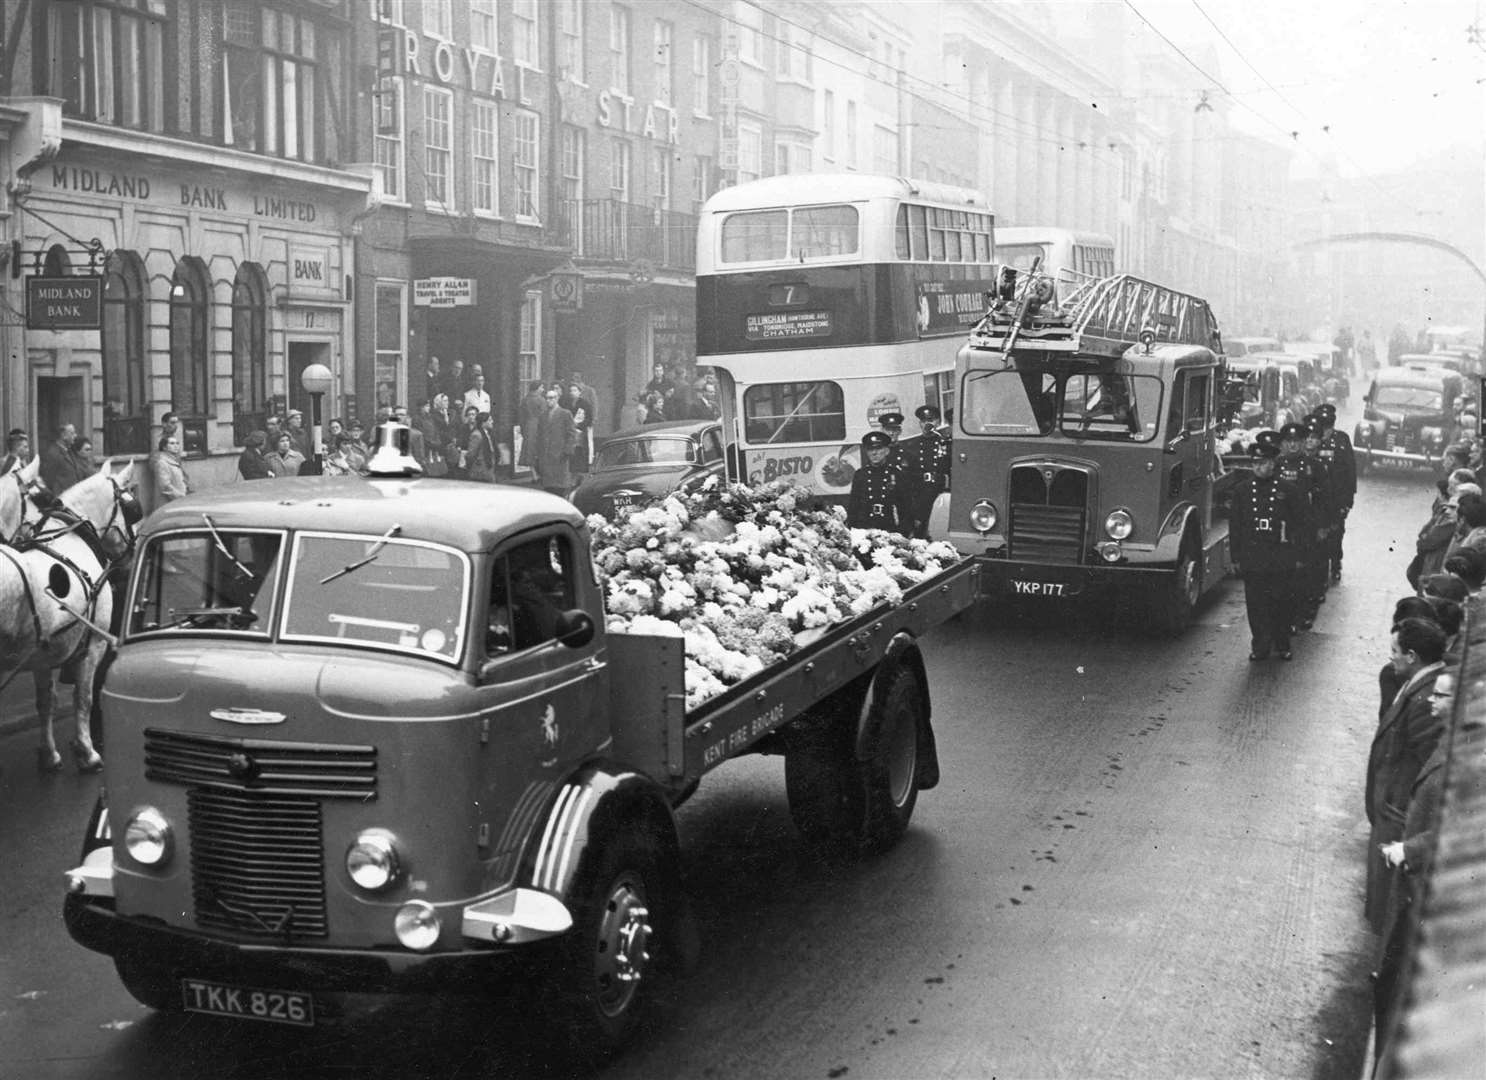 Three firemen were among the six people killed and 15 badly hurt when a 120-foot ventilating shaft collapsed at Oakwood Hospital in Maidstone in the early hours of November 29, 1957. The tower collapse came after a fire broke out at the mental hospital. Some 350 patients were evacuated. Pictured is the funeral procession through the town